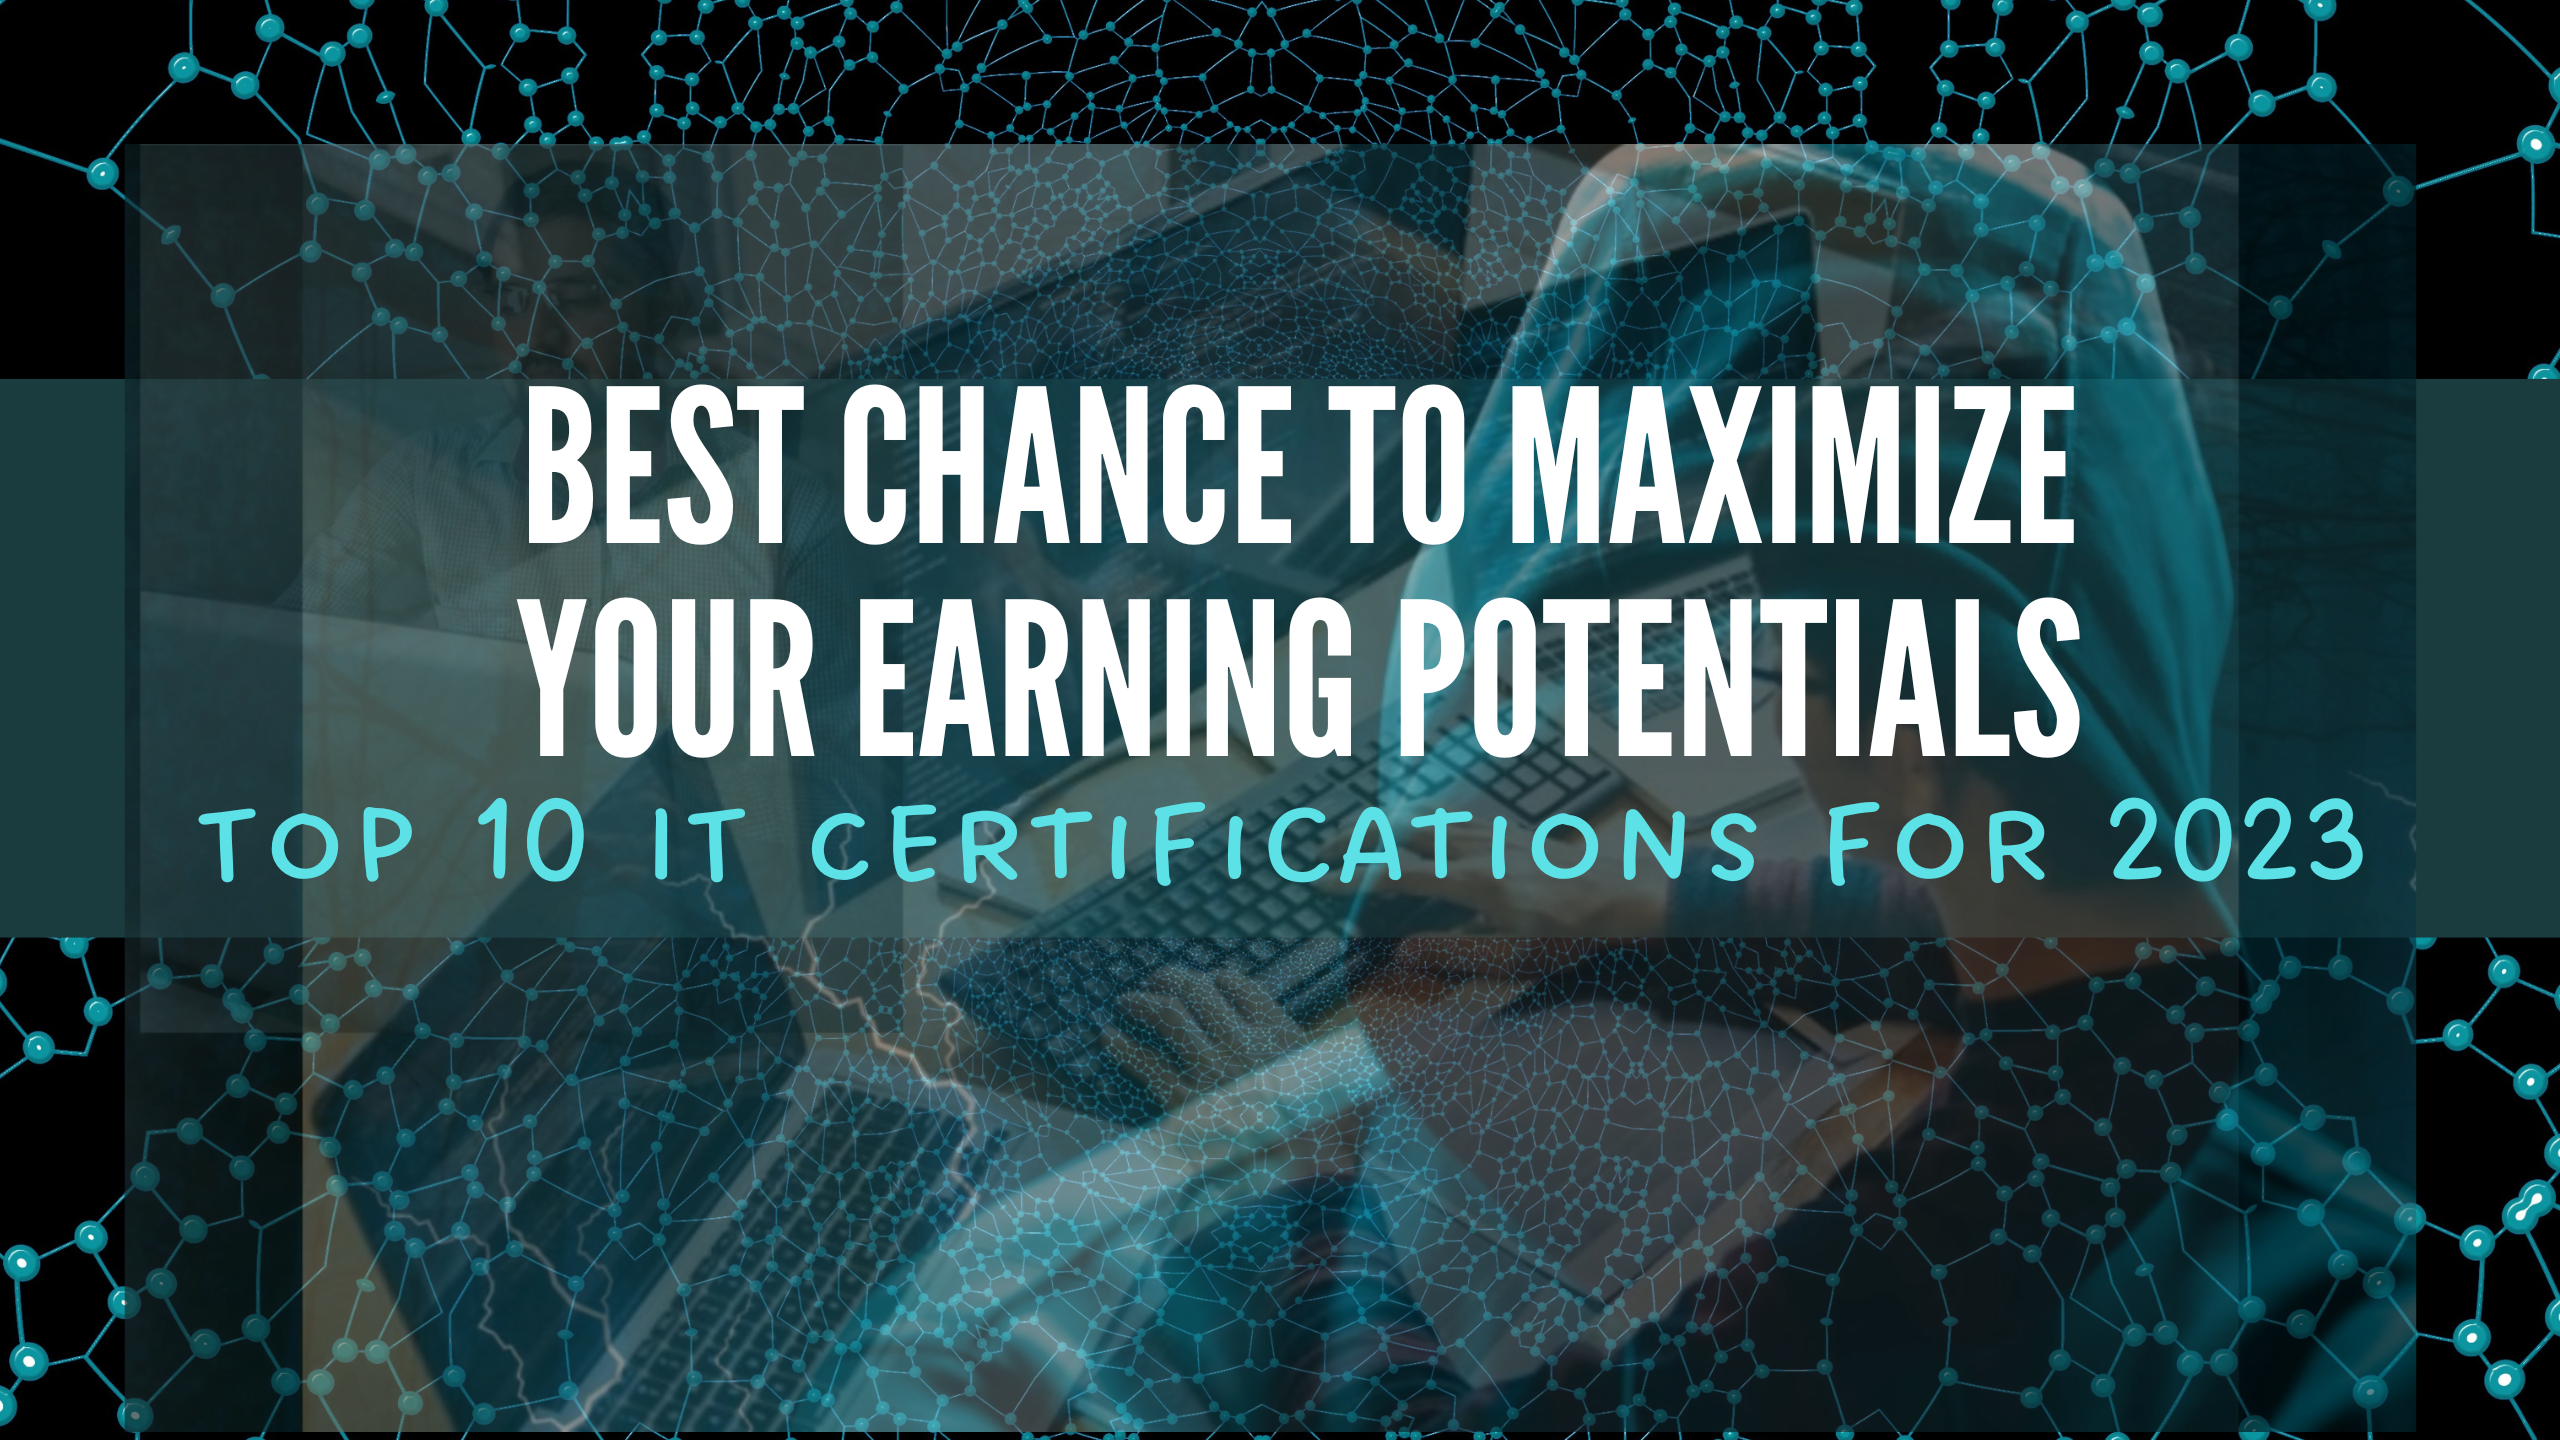 Best Chance to Maximize Your Earning Potentials – Top 10 IT Certifications for 2023